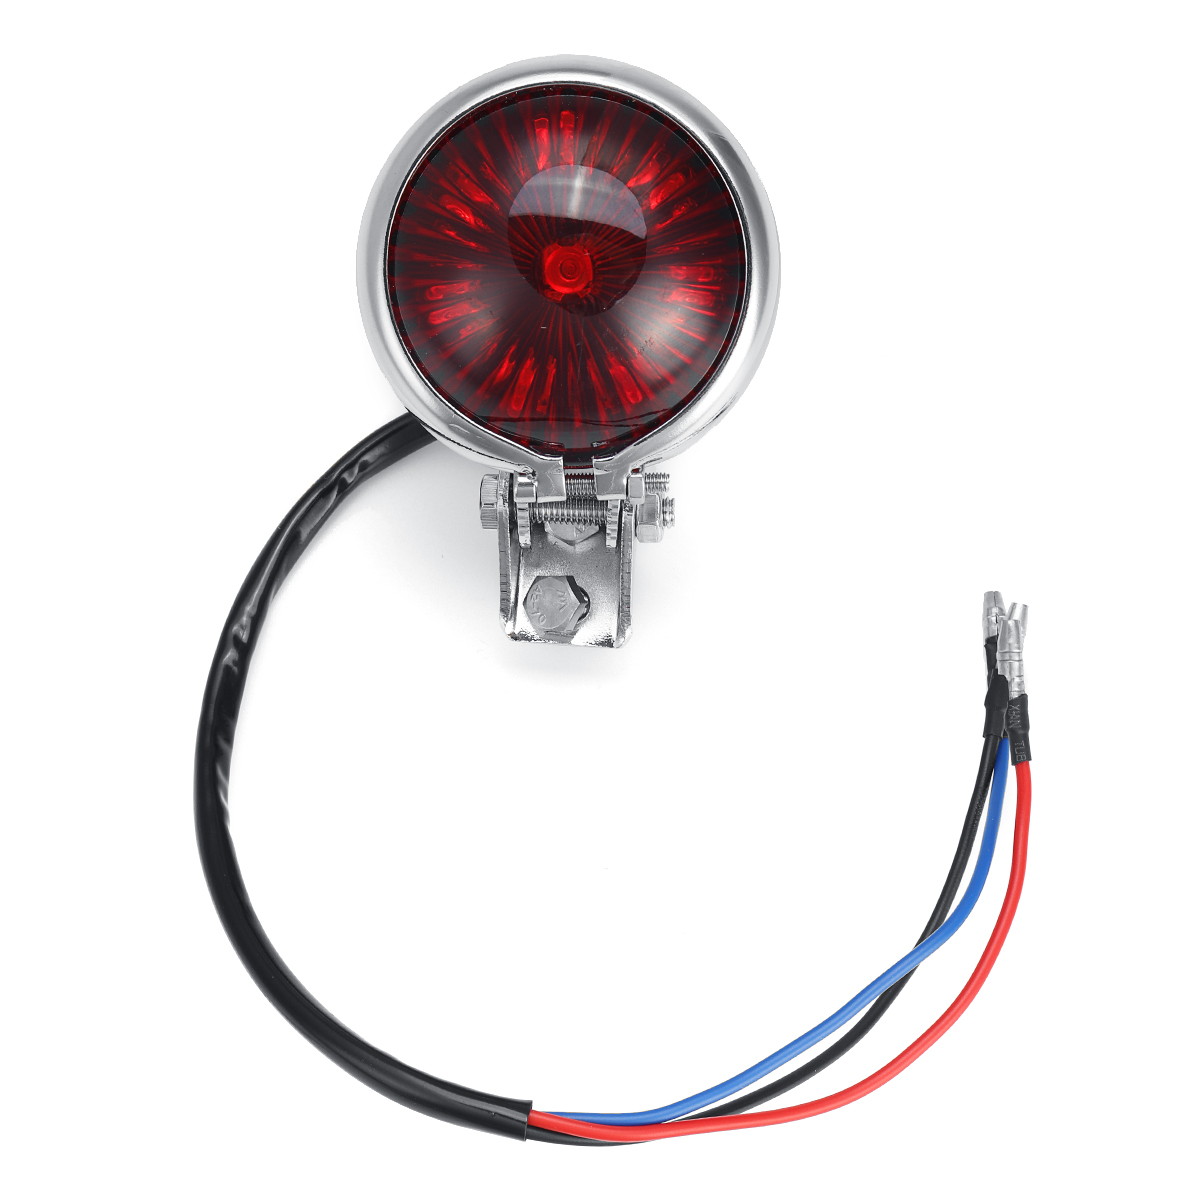 12V Motorcycle Smoke Rear Brake Stop Red Tail Light for Harley Chopper Cafe Racer - Auto GoShop